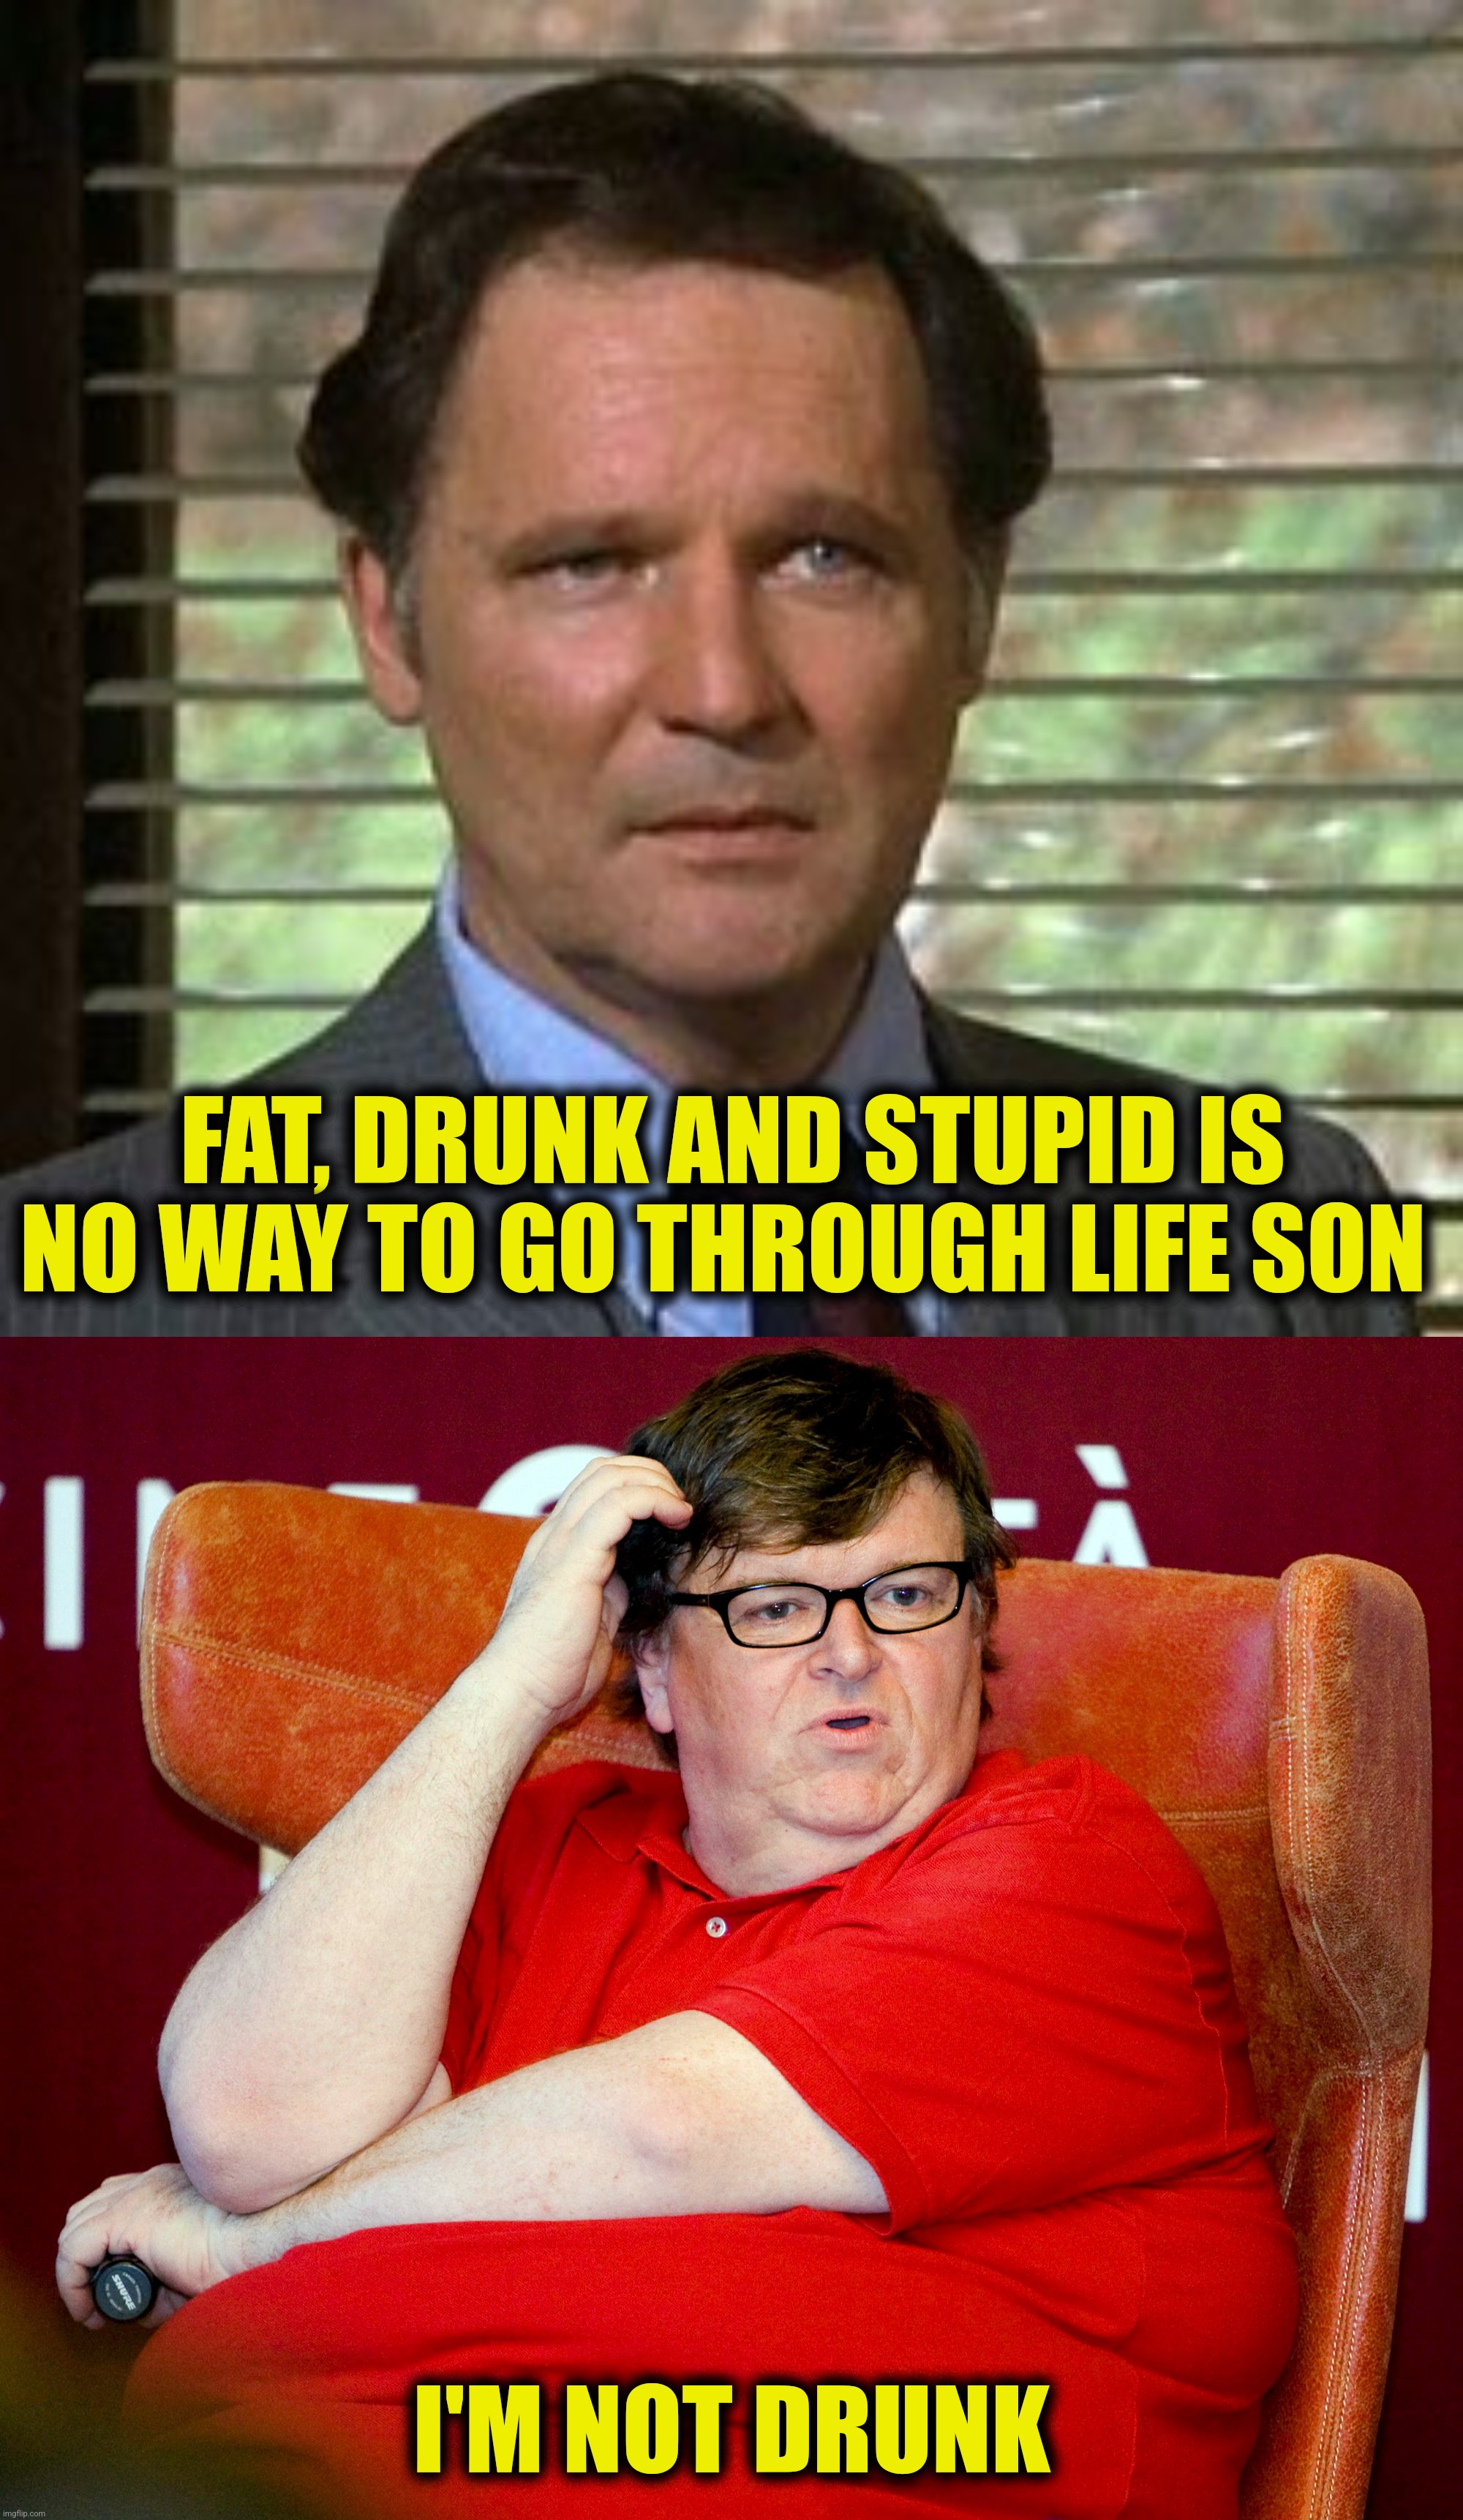 Two out of three ain't bad |  FAT, DRUNK AND STUPID IS NO WAY TO GO THROUGH LIFE SON; I'M NOT DRUNK | image tagged in bad photoshop,michael moore,animal house,fat,stupid | made w/ Imgflip meme maker